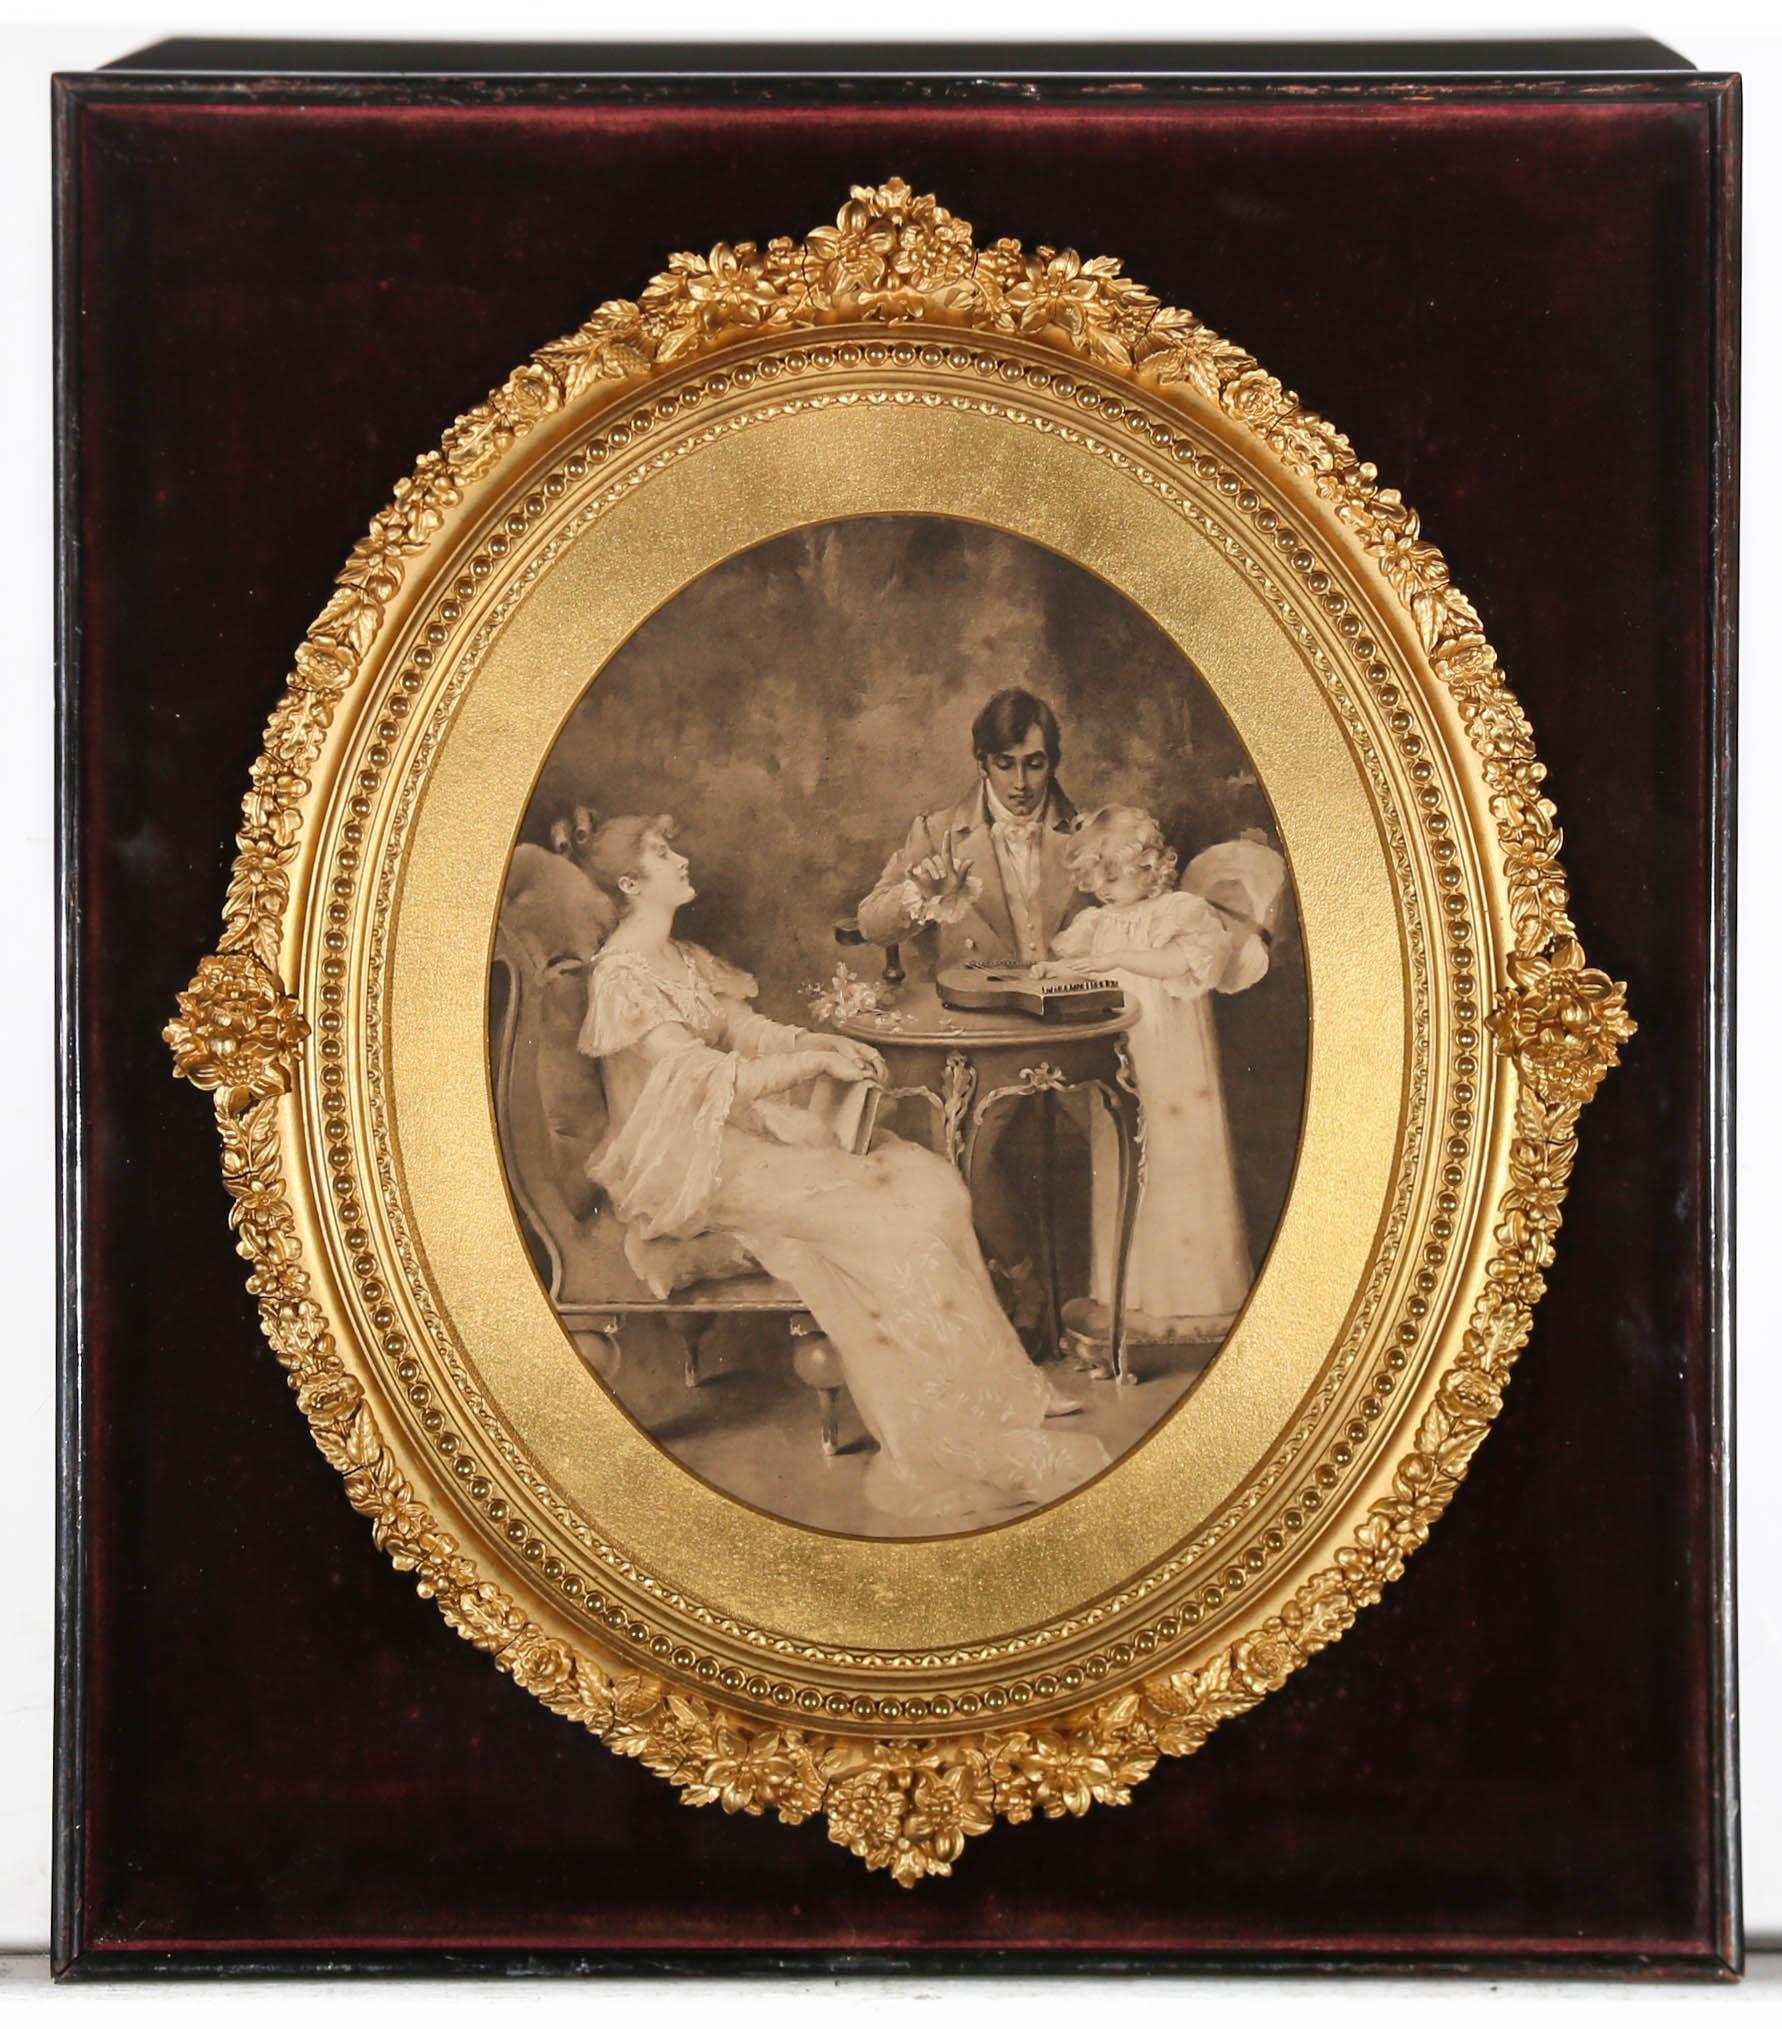 A charming mezzotint depicting a family gathered around a table. The father teaches a young child how to play a zither while the mother watches. Beautifully presented in a cabinet frame with ornate floral moulding to the inner oval gilt frame.